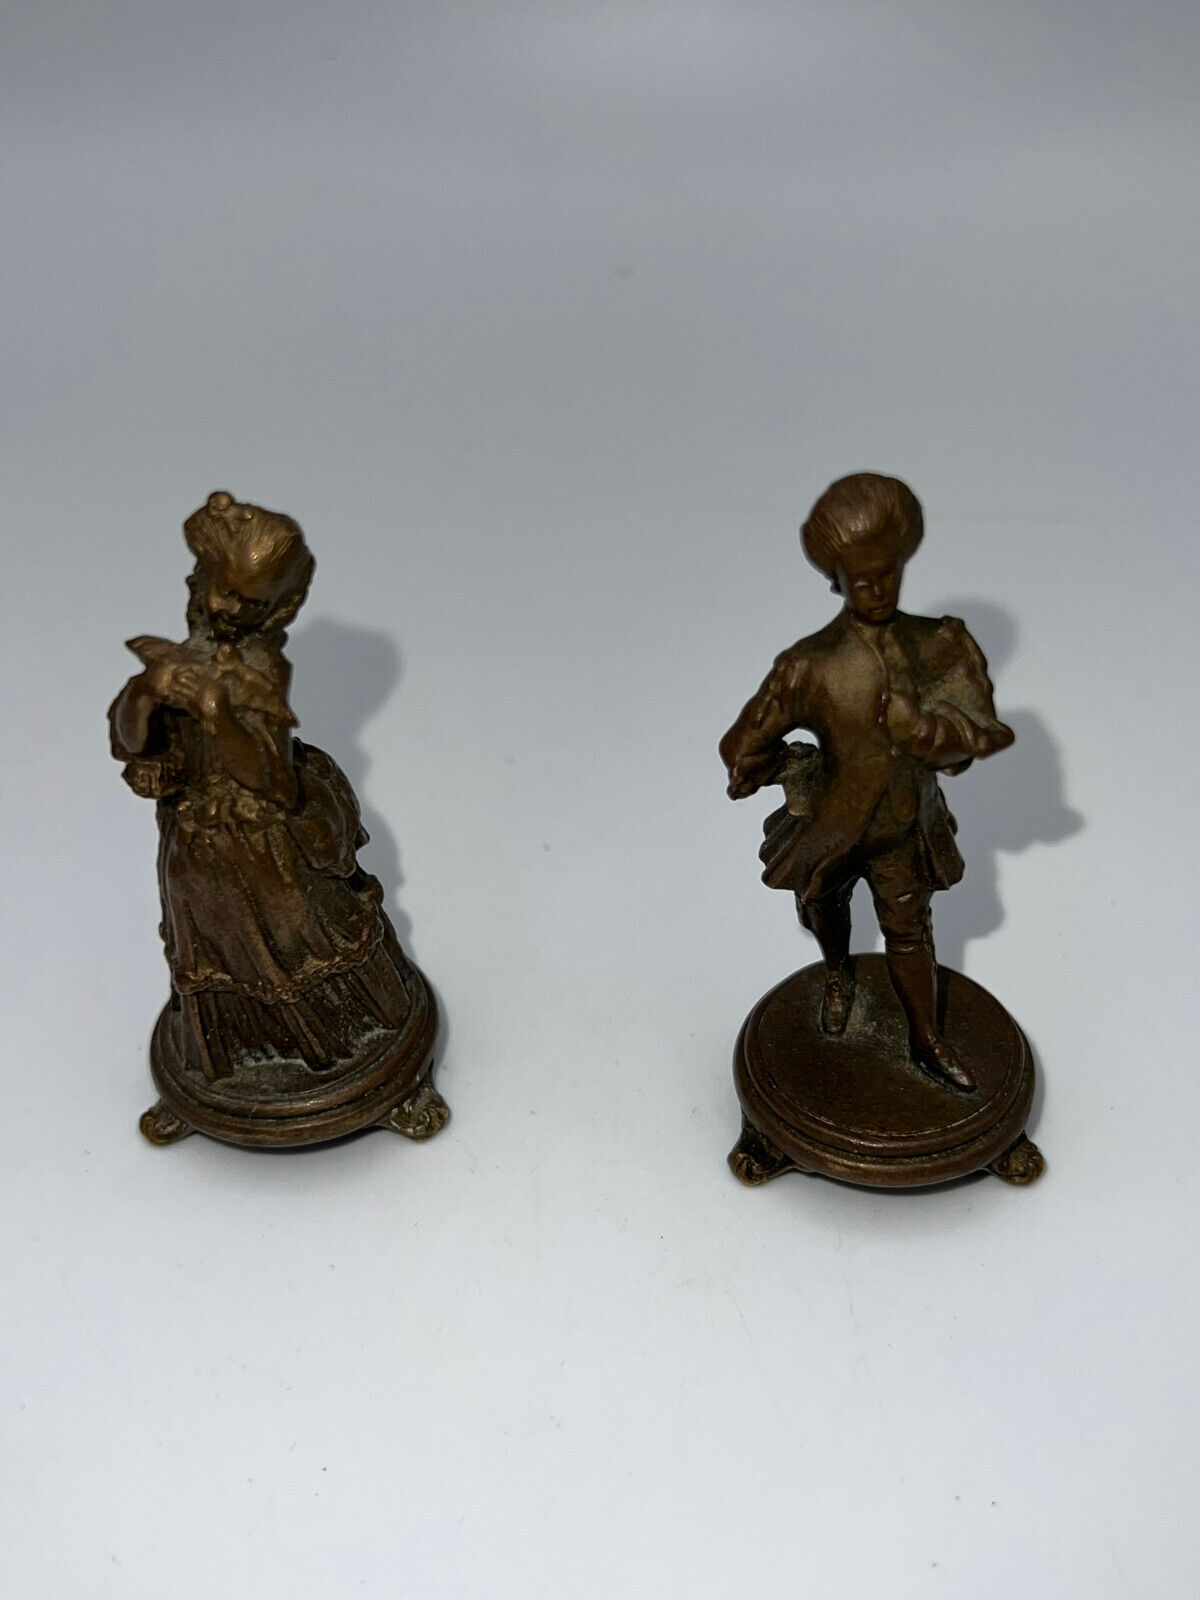 Antique Pair of English or French Figurine Miniatures Late 19th Century Style